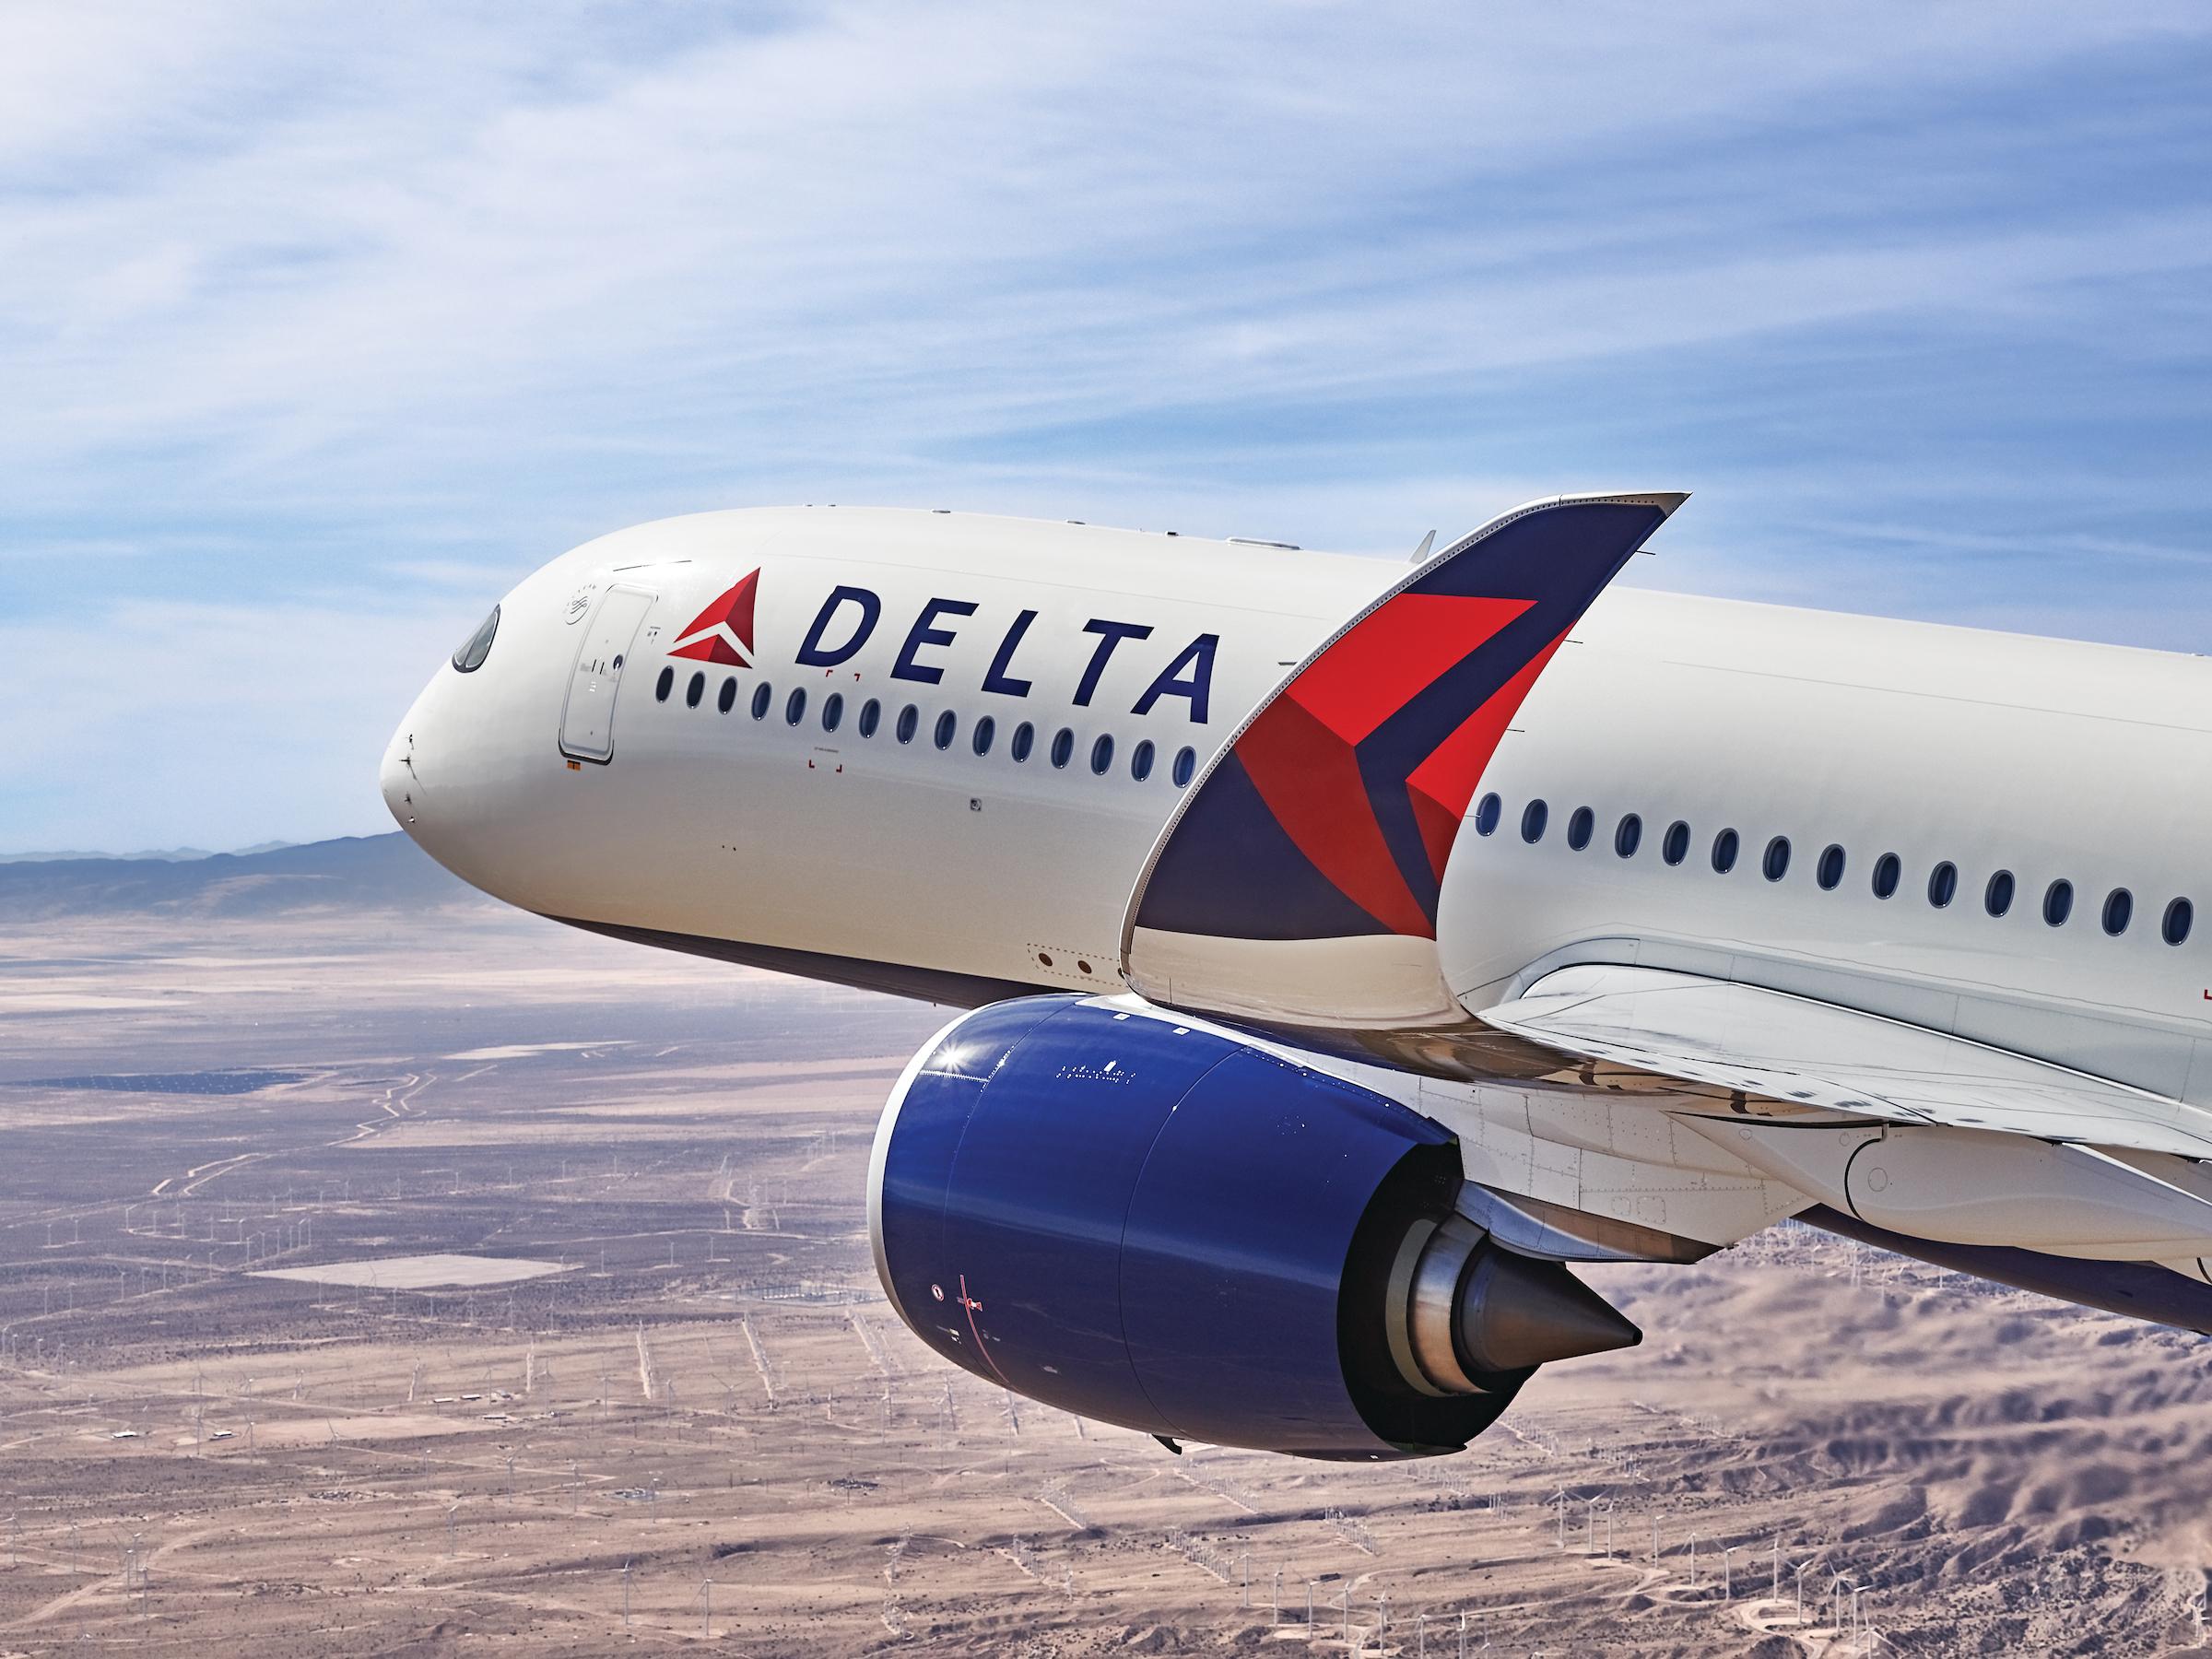 Both Delta And United Cleared To Add Cape Town Flights